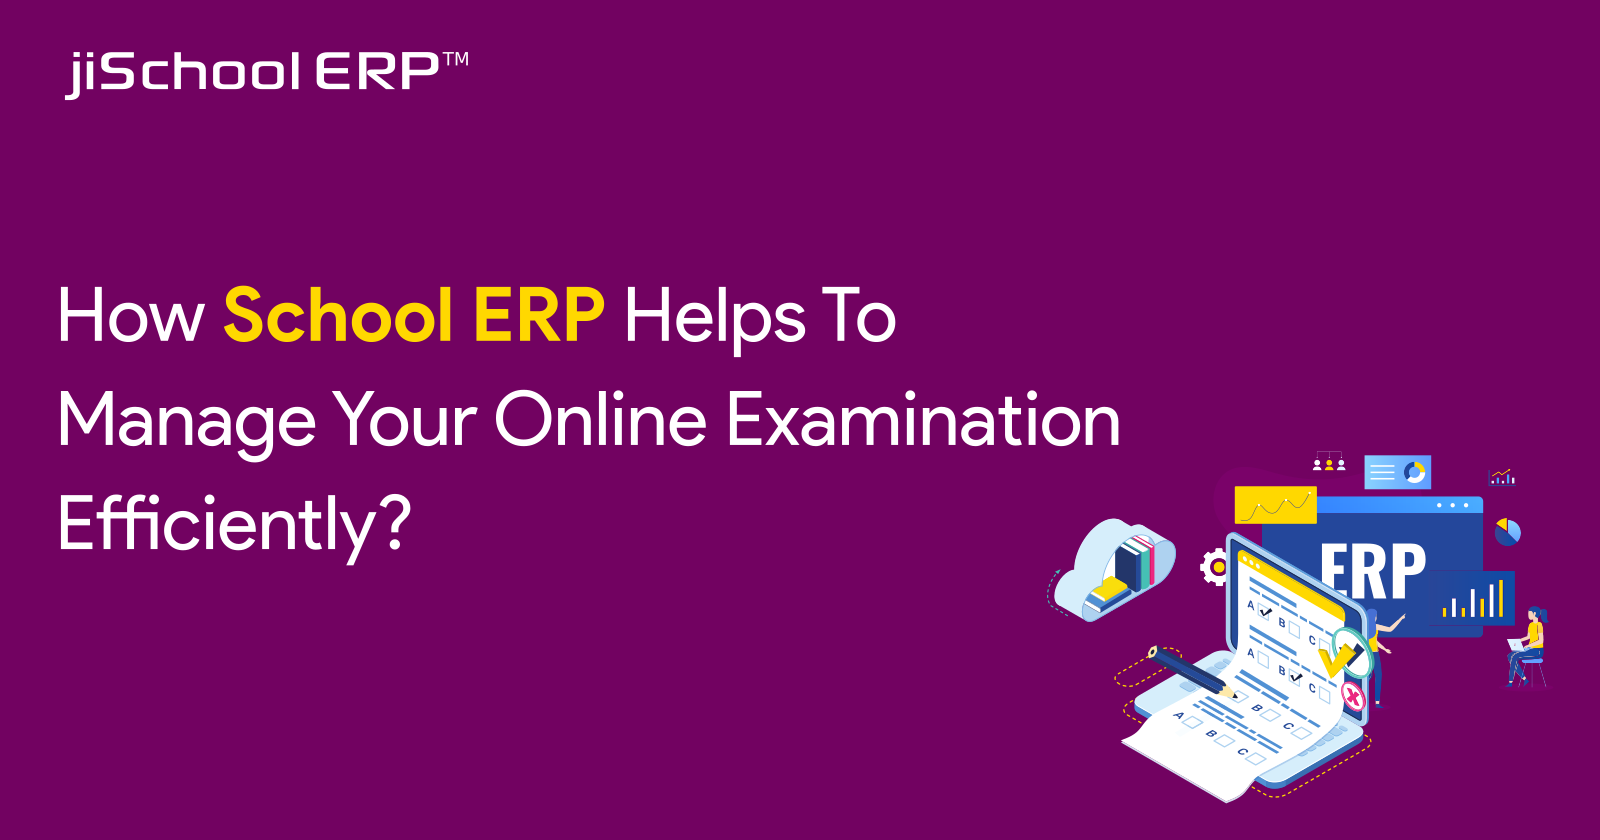 How School ERP Helps to Manage Your Online Examination Efficiently?